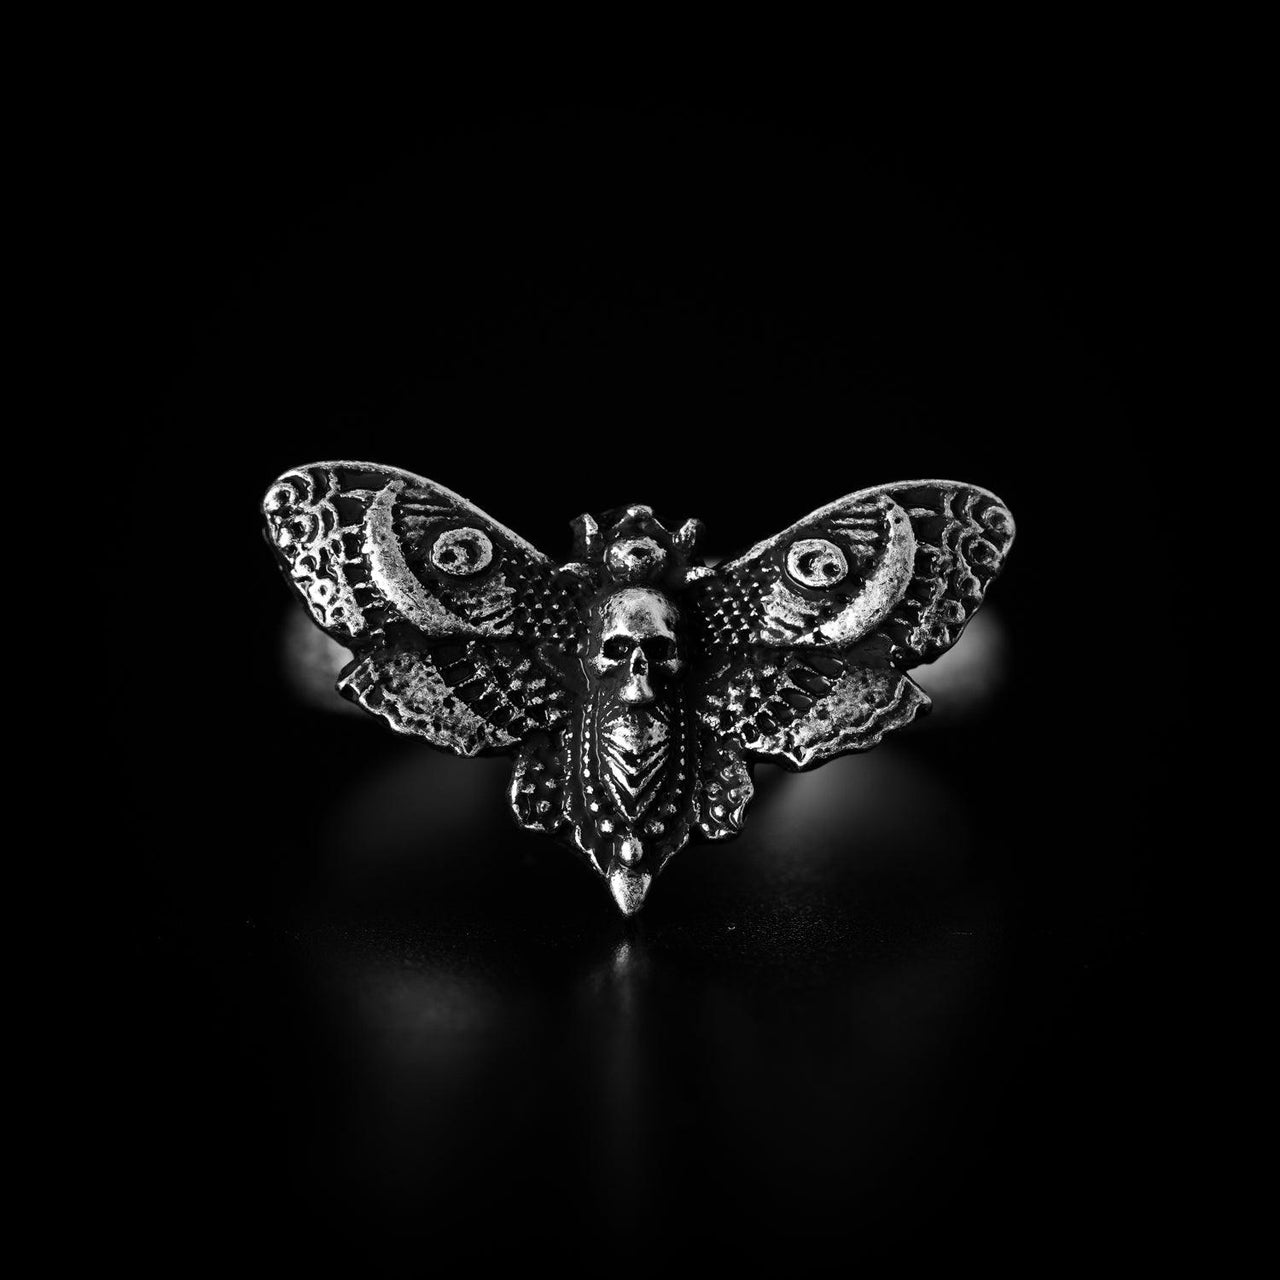 King's Head Moth Ring - Black Feather Design